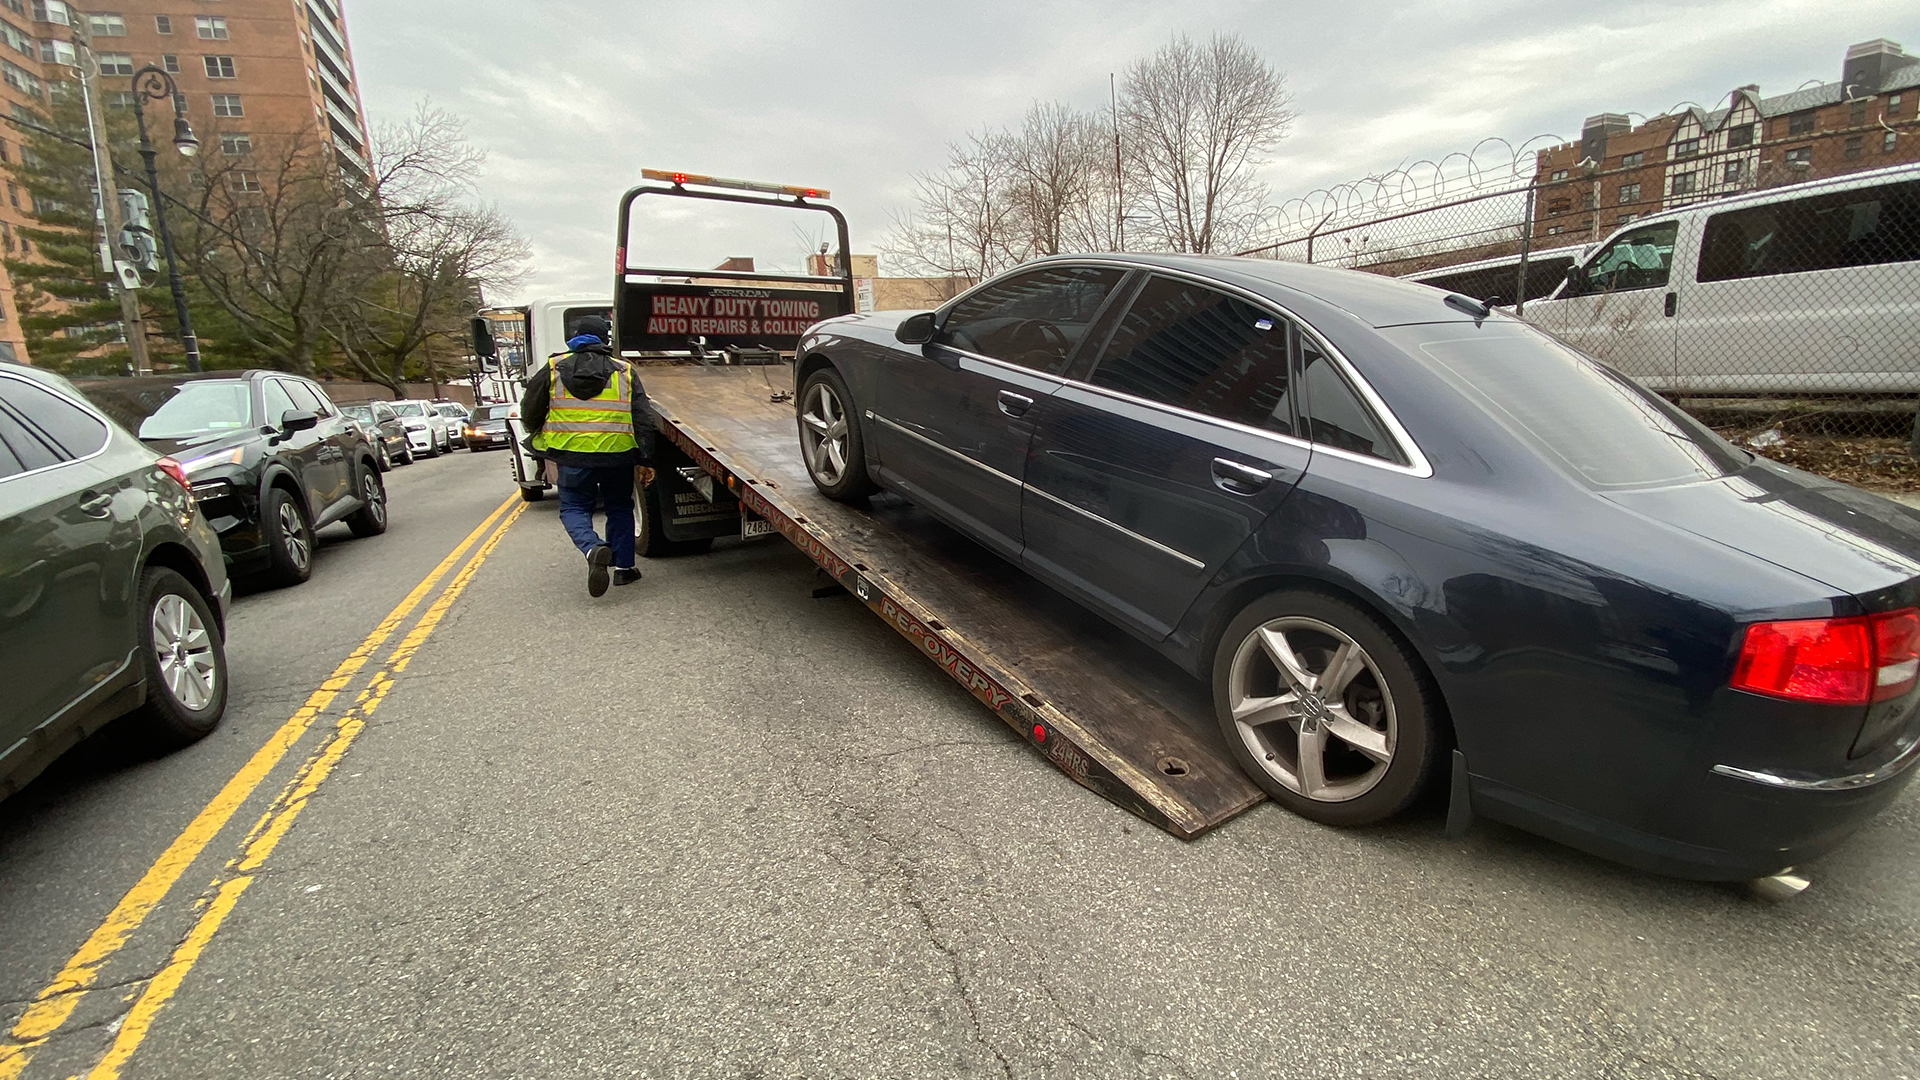 My car was towed from outside my own home over a flat tire – but lawyers say I might be in the wrong [Video]